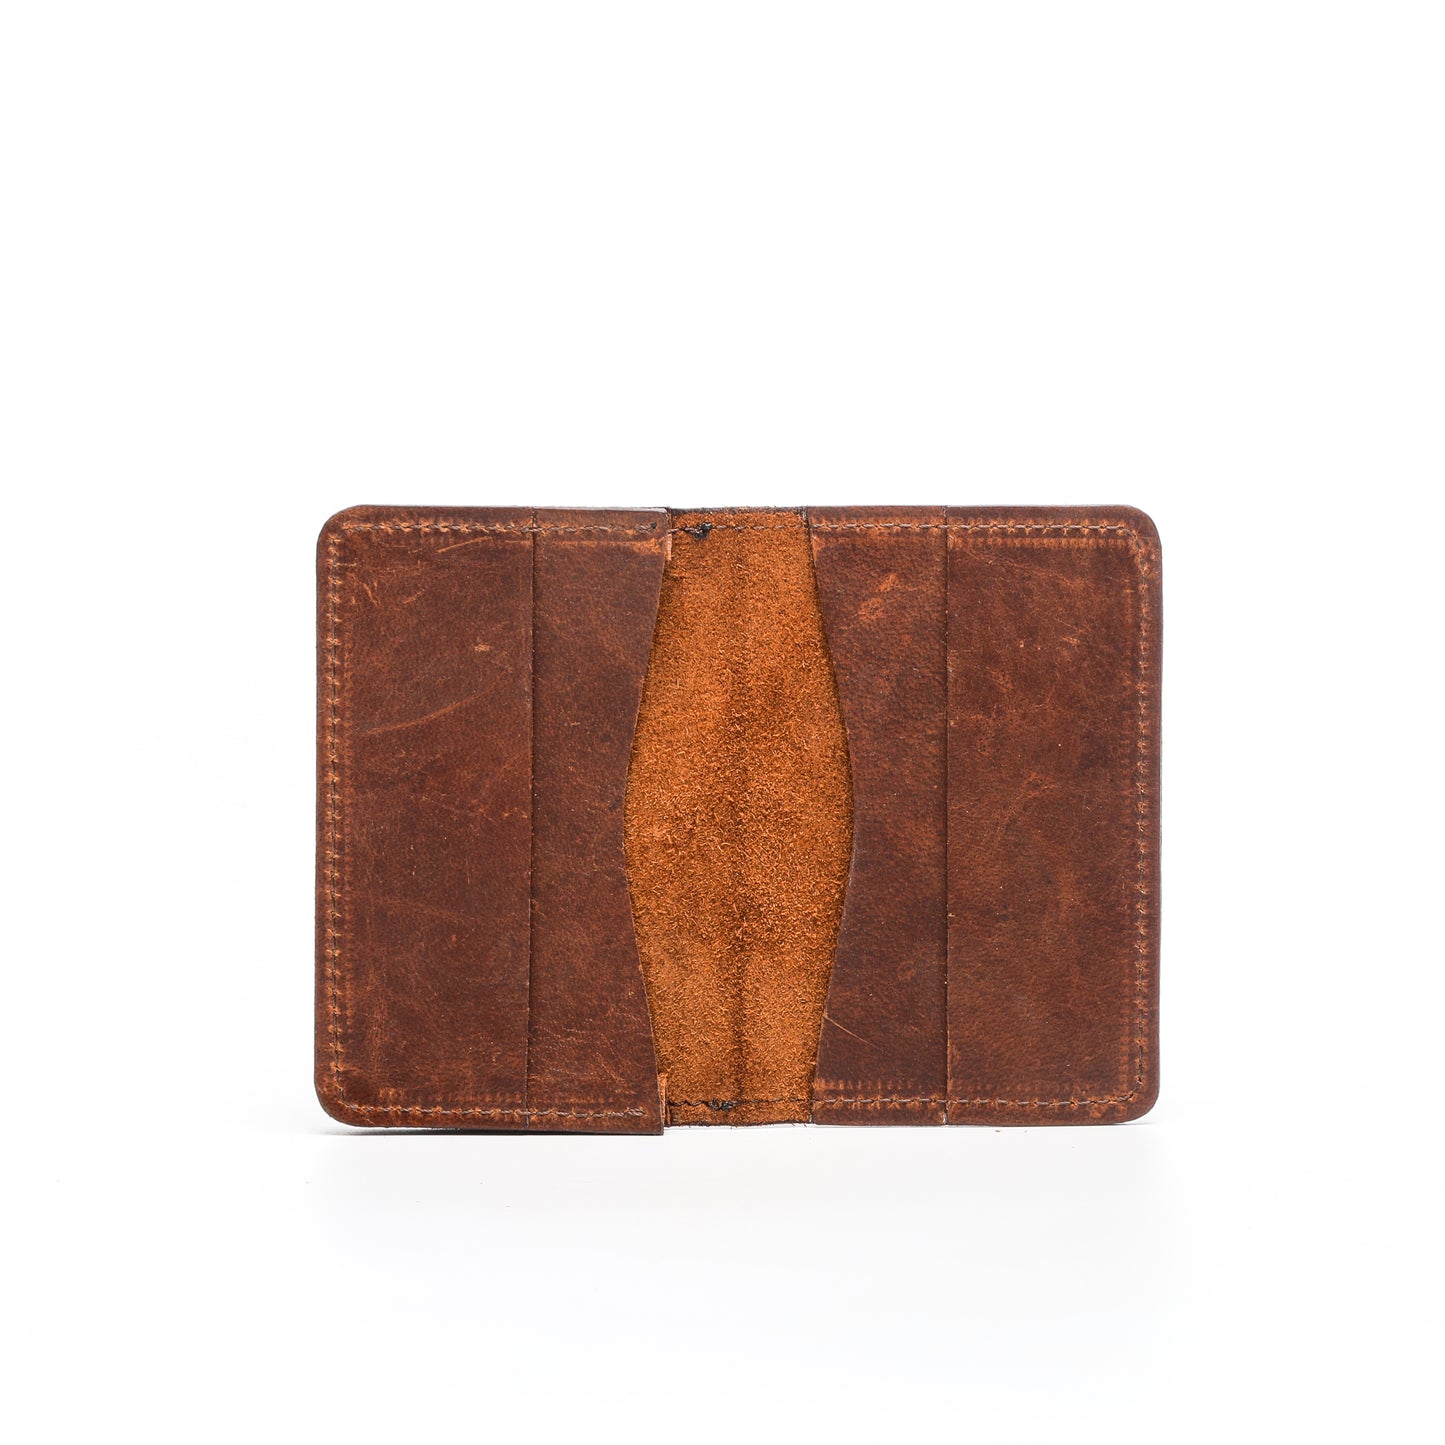 The Minibizz - Leather business Cards Holder/Wallet